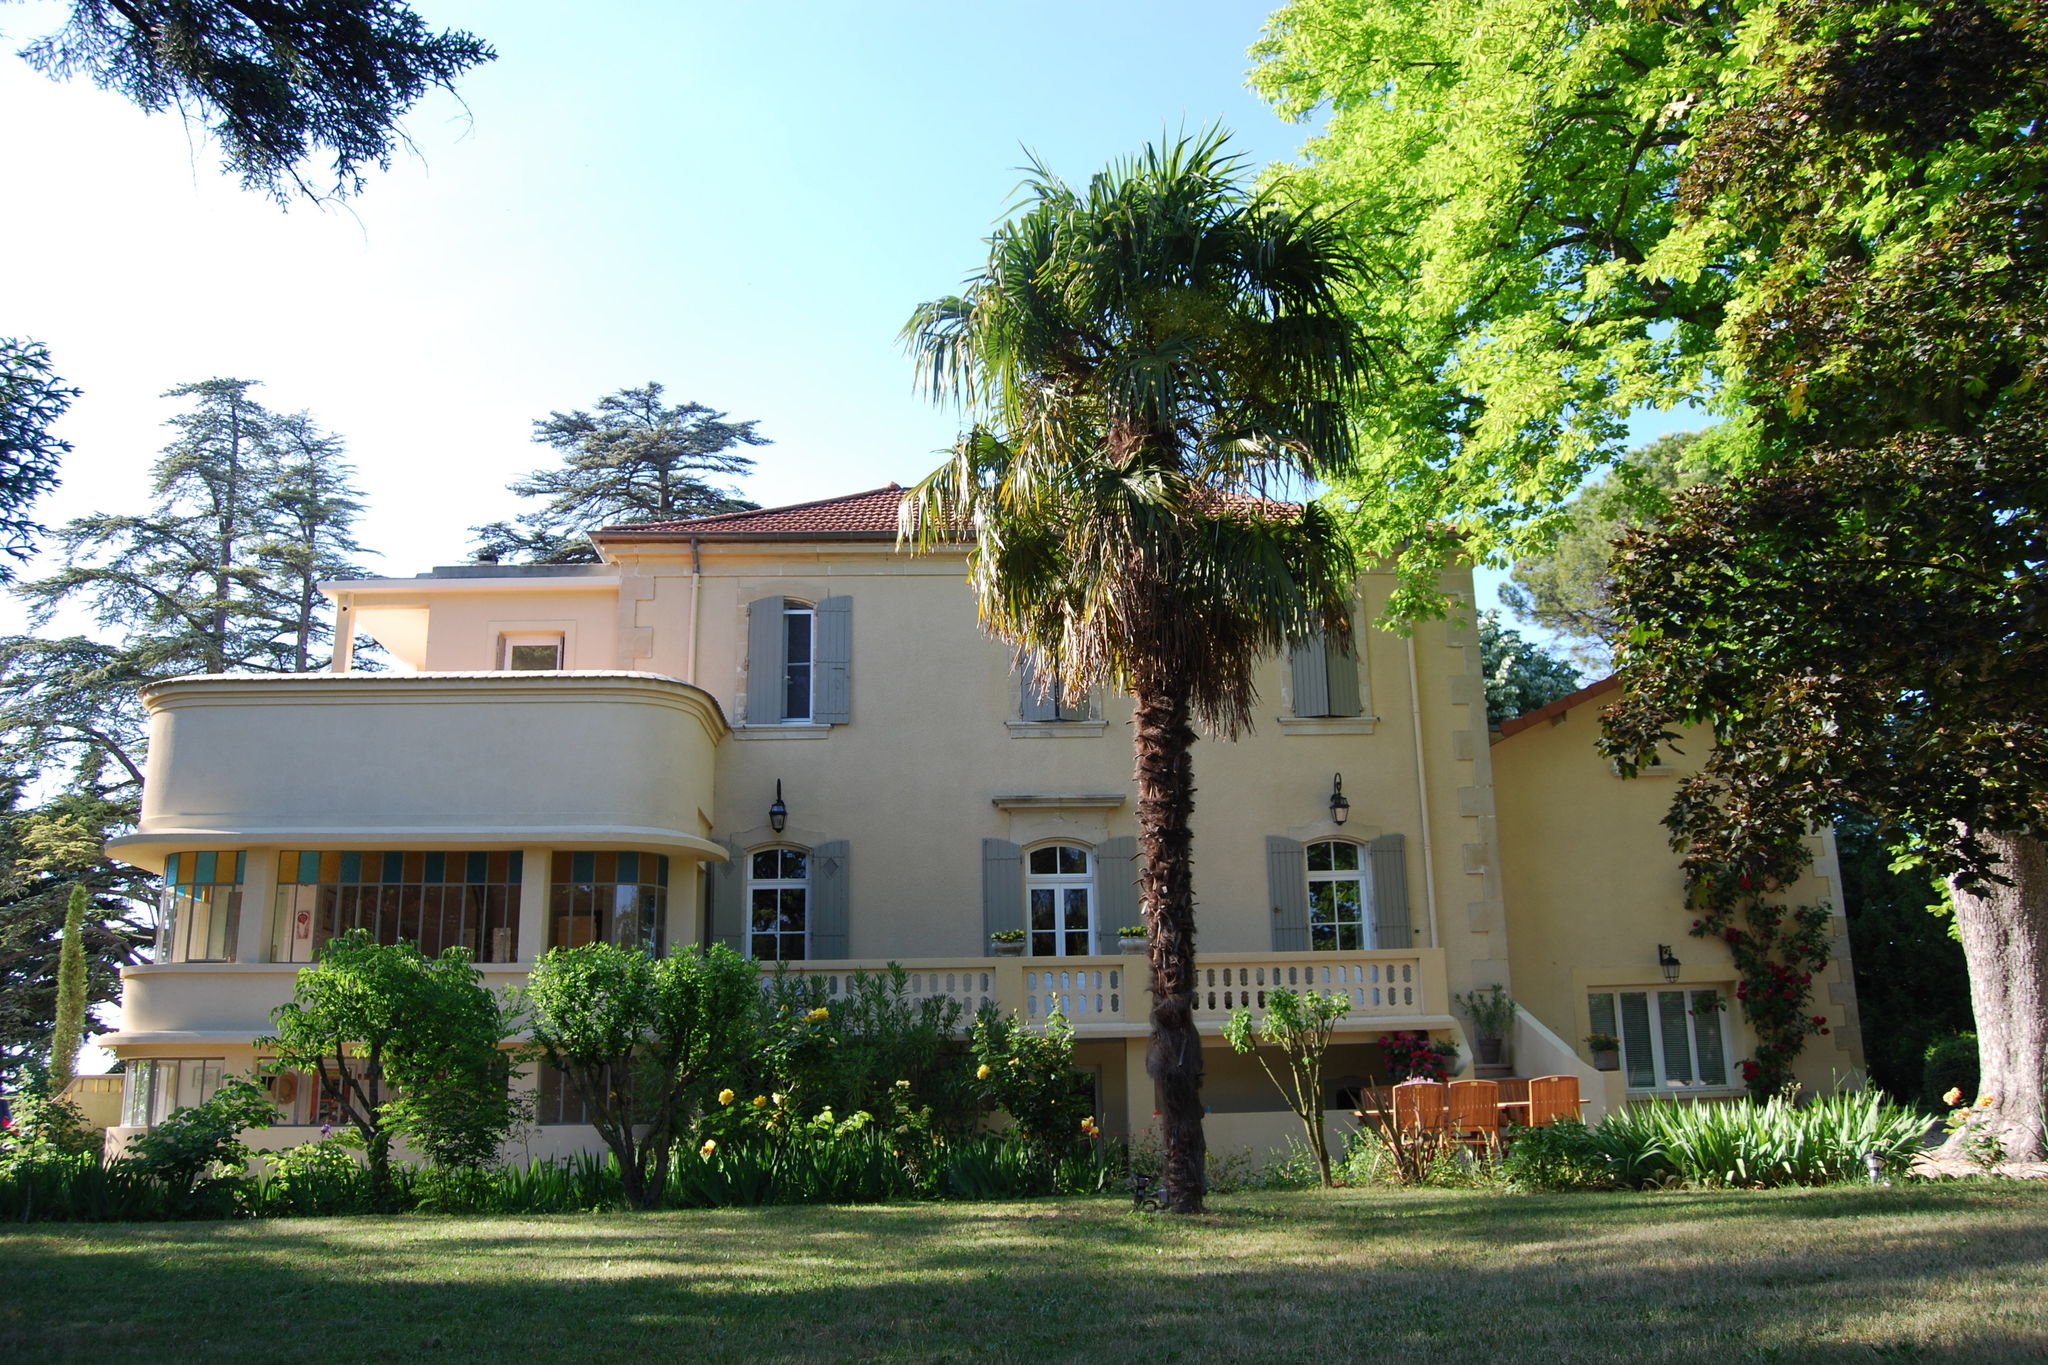 Gîte with friends room in stately villa with pool and parkgarden